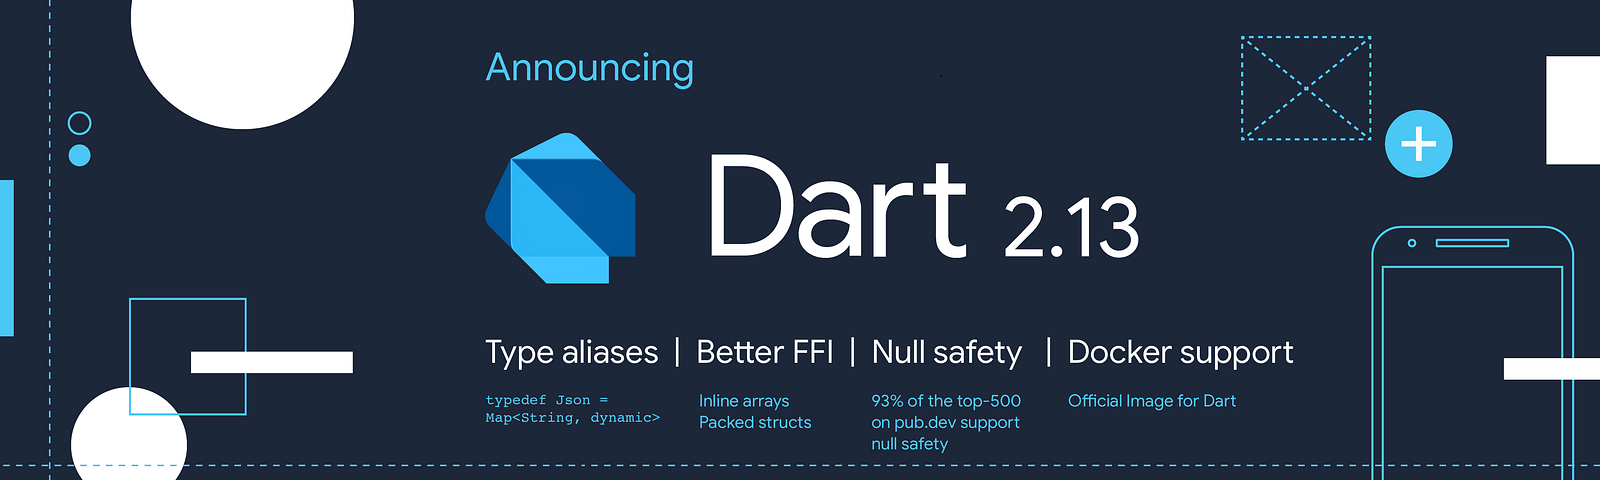 A graphic showing highlights of what’s in this post: type aliases, better FFI, null safety, Docker support